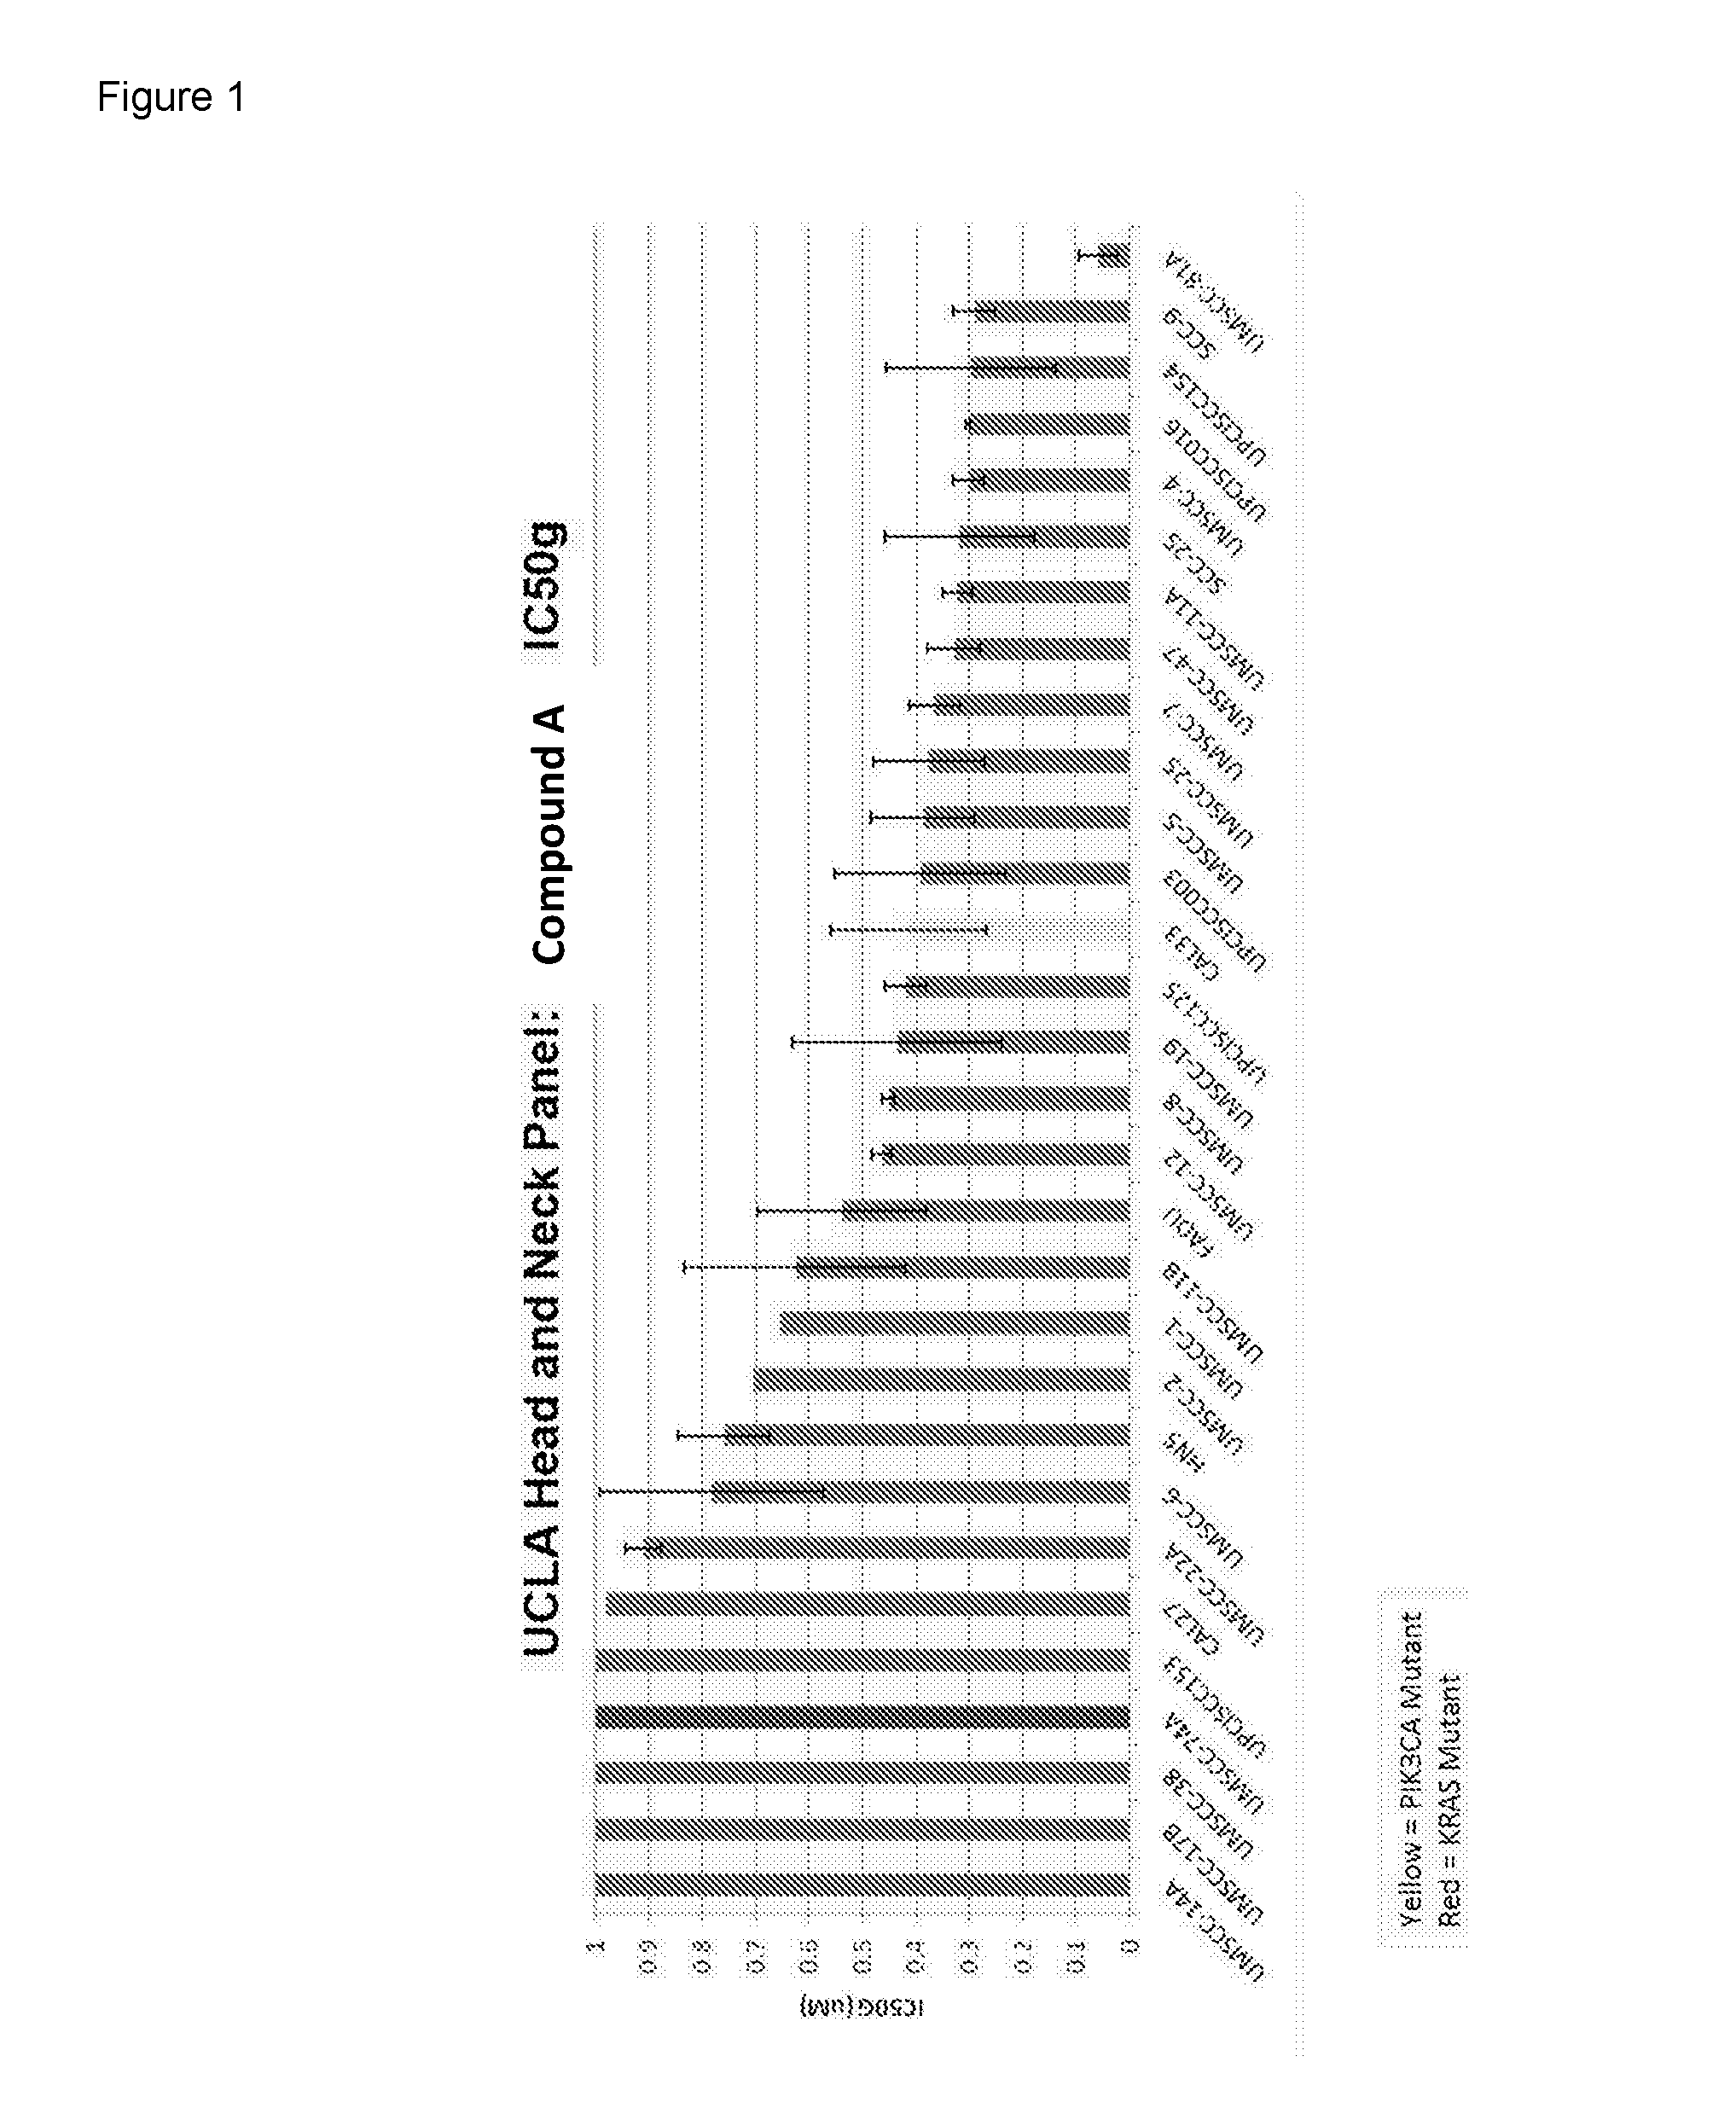 Combination of a PI3 Kinase Inhibitor with Pacitaxel for Use in the Treatment or Prevention of a Cancer of the Head and Neck